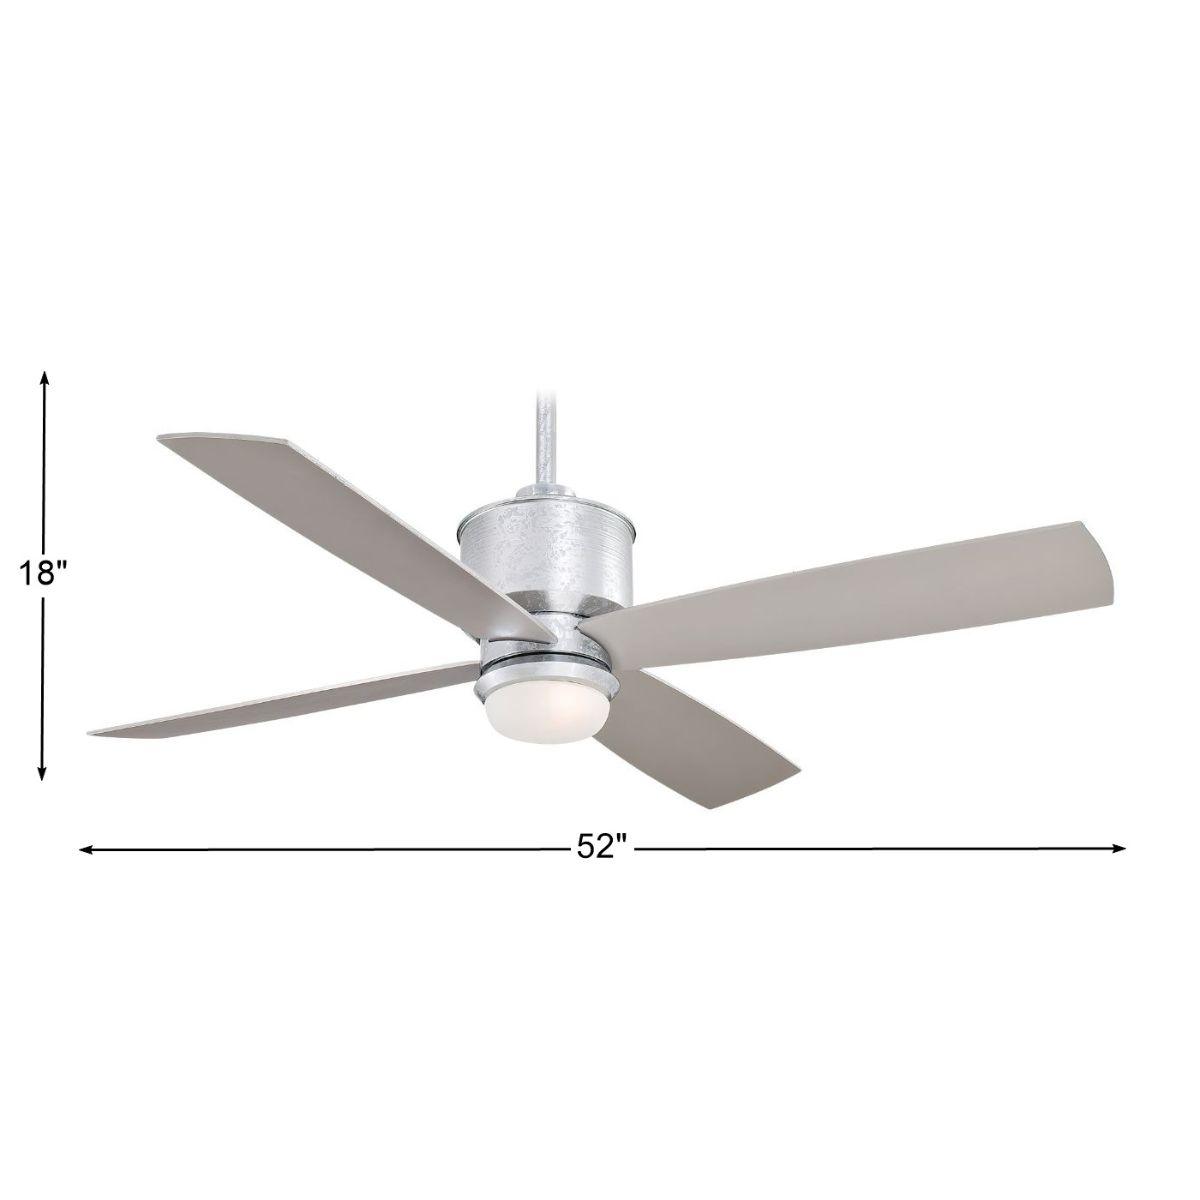 Strata 52 Inch Outdoor Ceiling Fan With Light And Remote